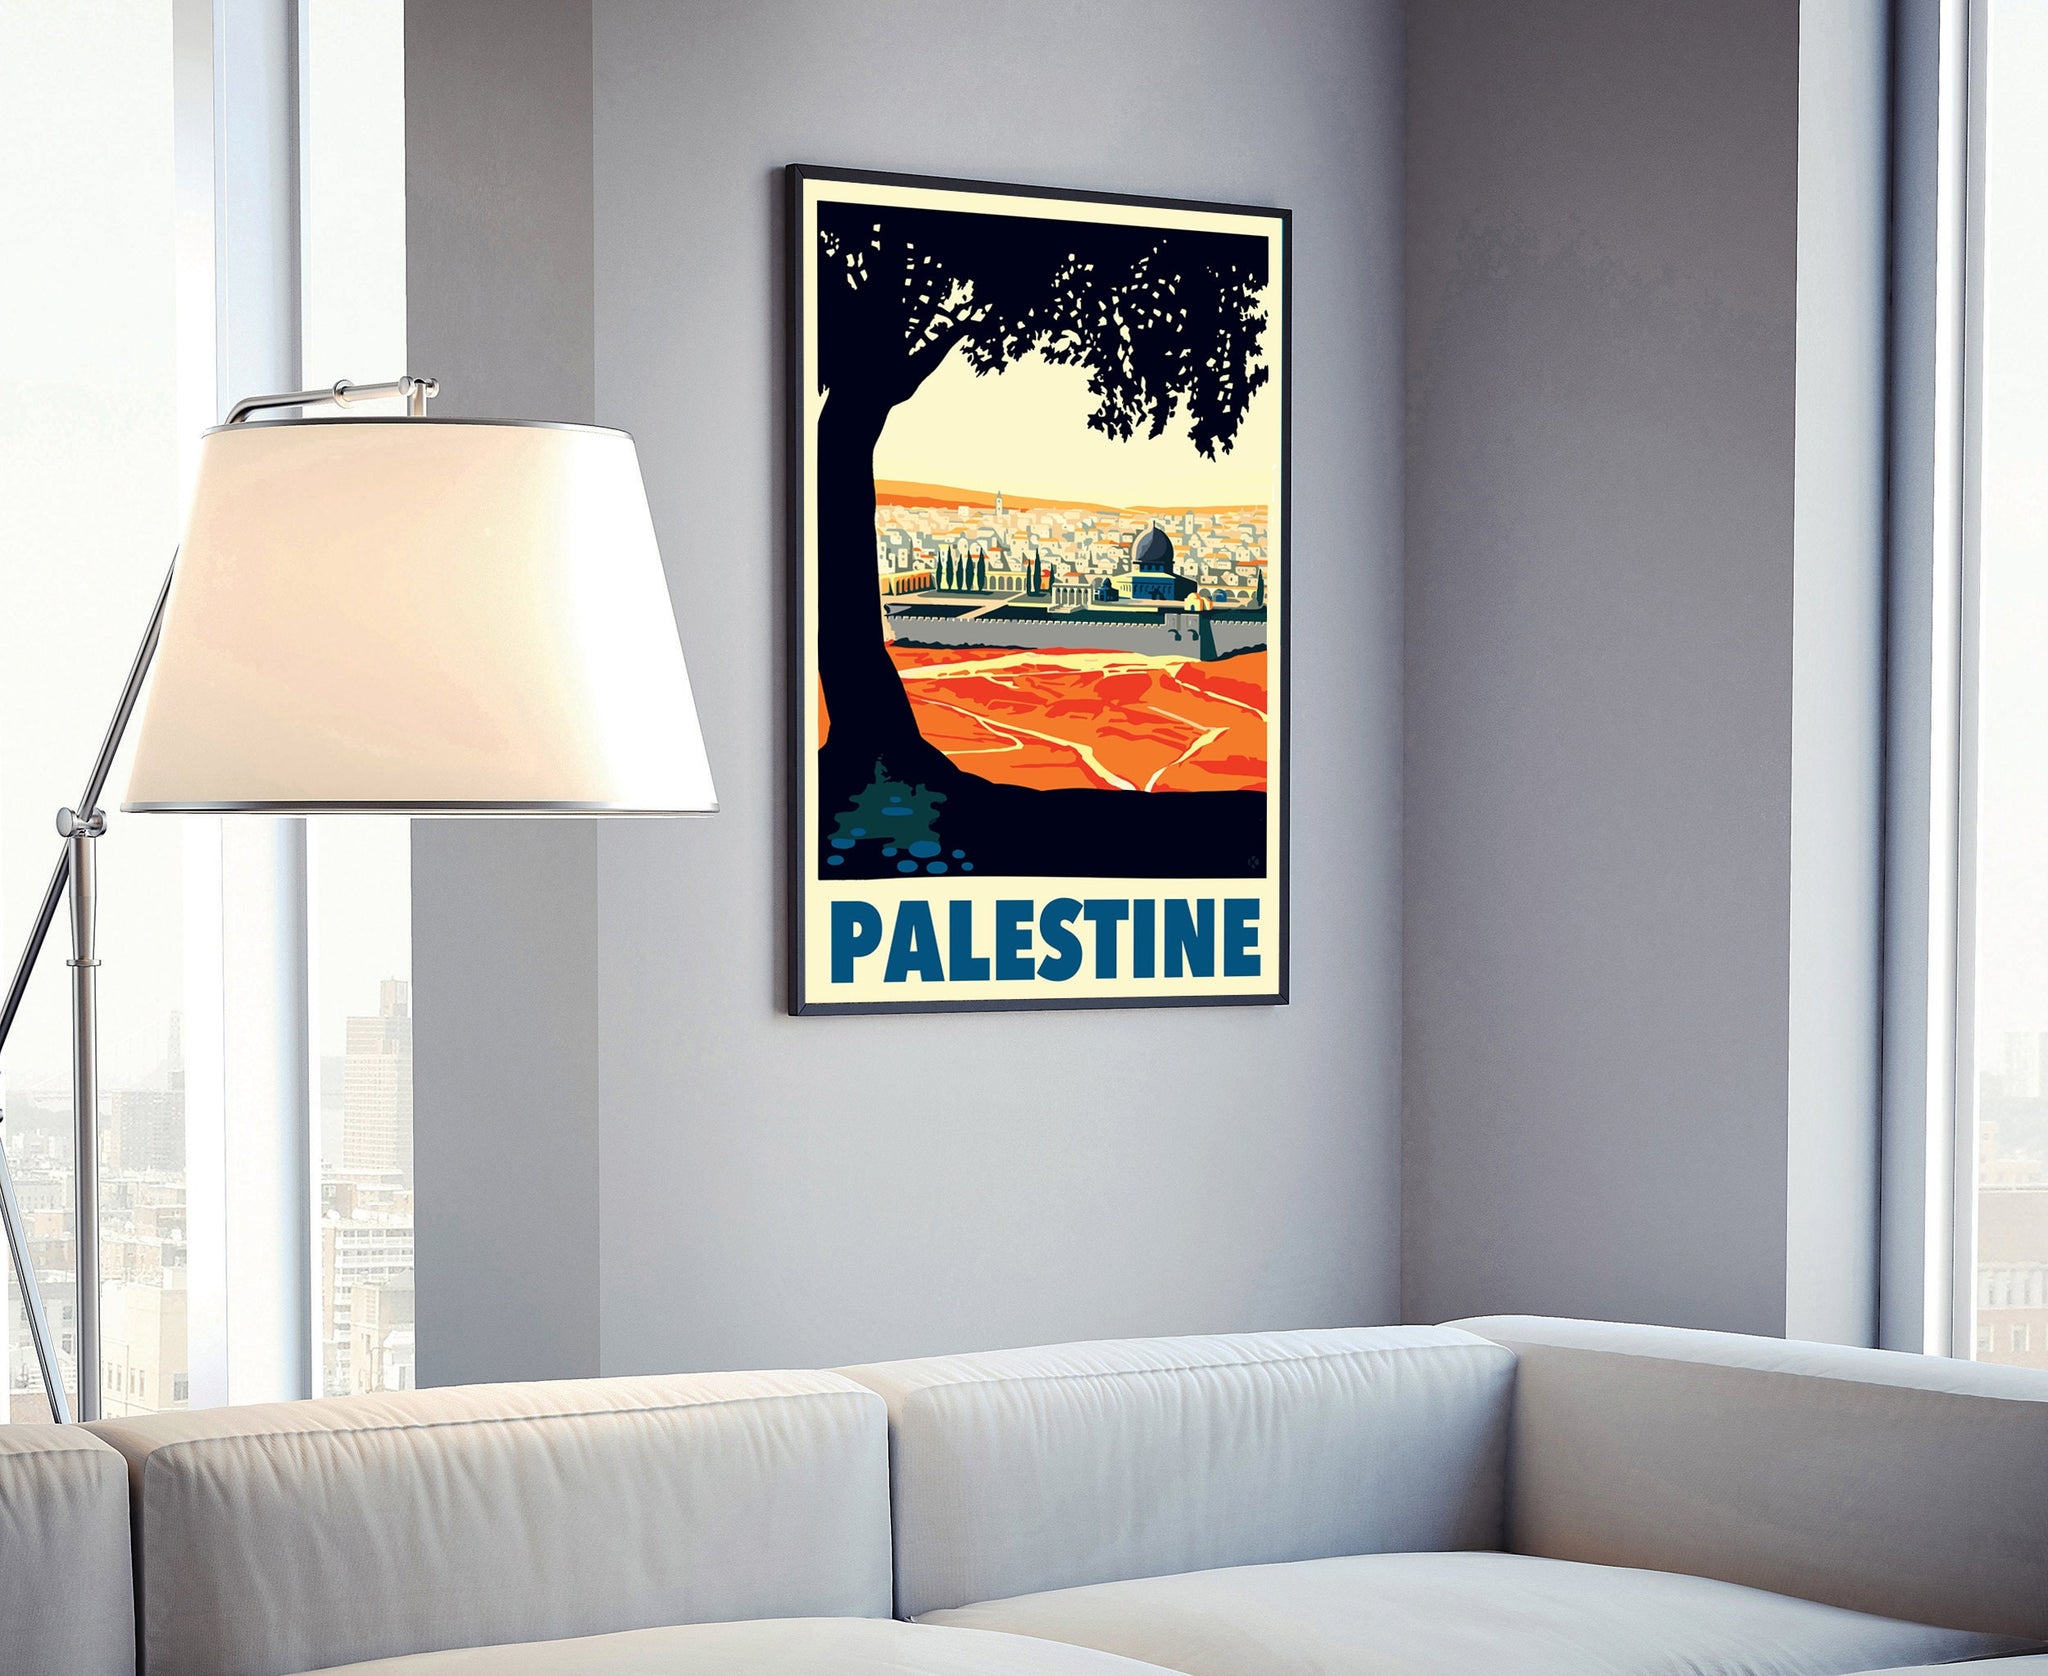 PALESTINE retro style travel poster, Palestine vintage rustic poster print, Home wall art, Office wall decorations, Palestine map poster